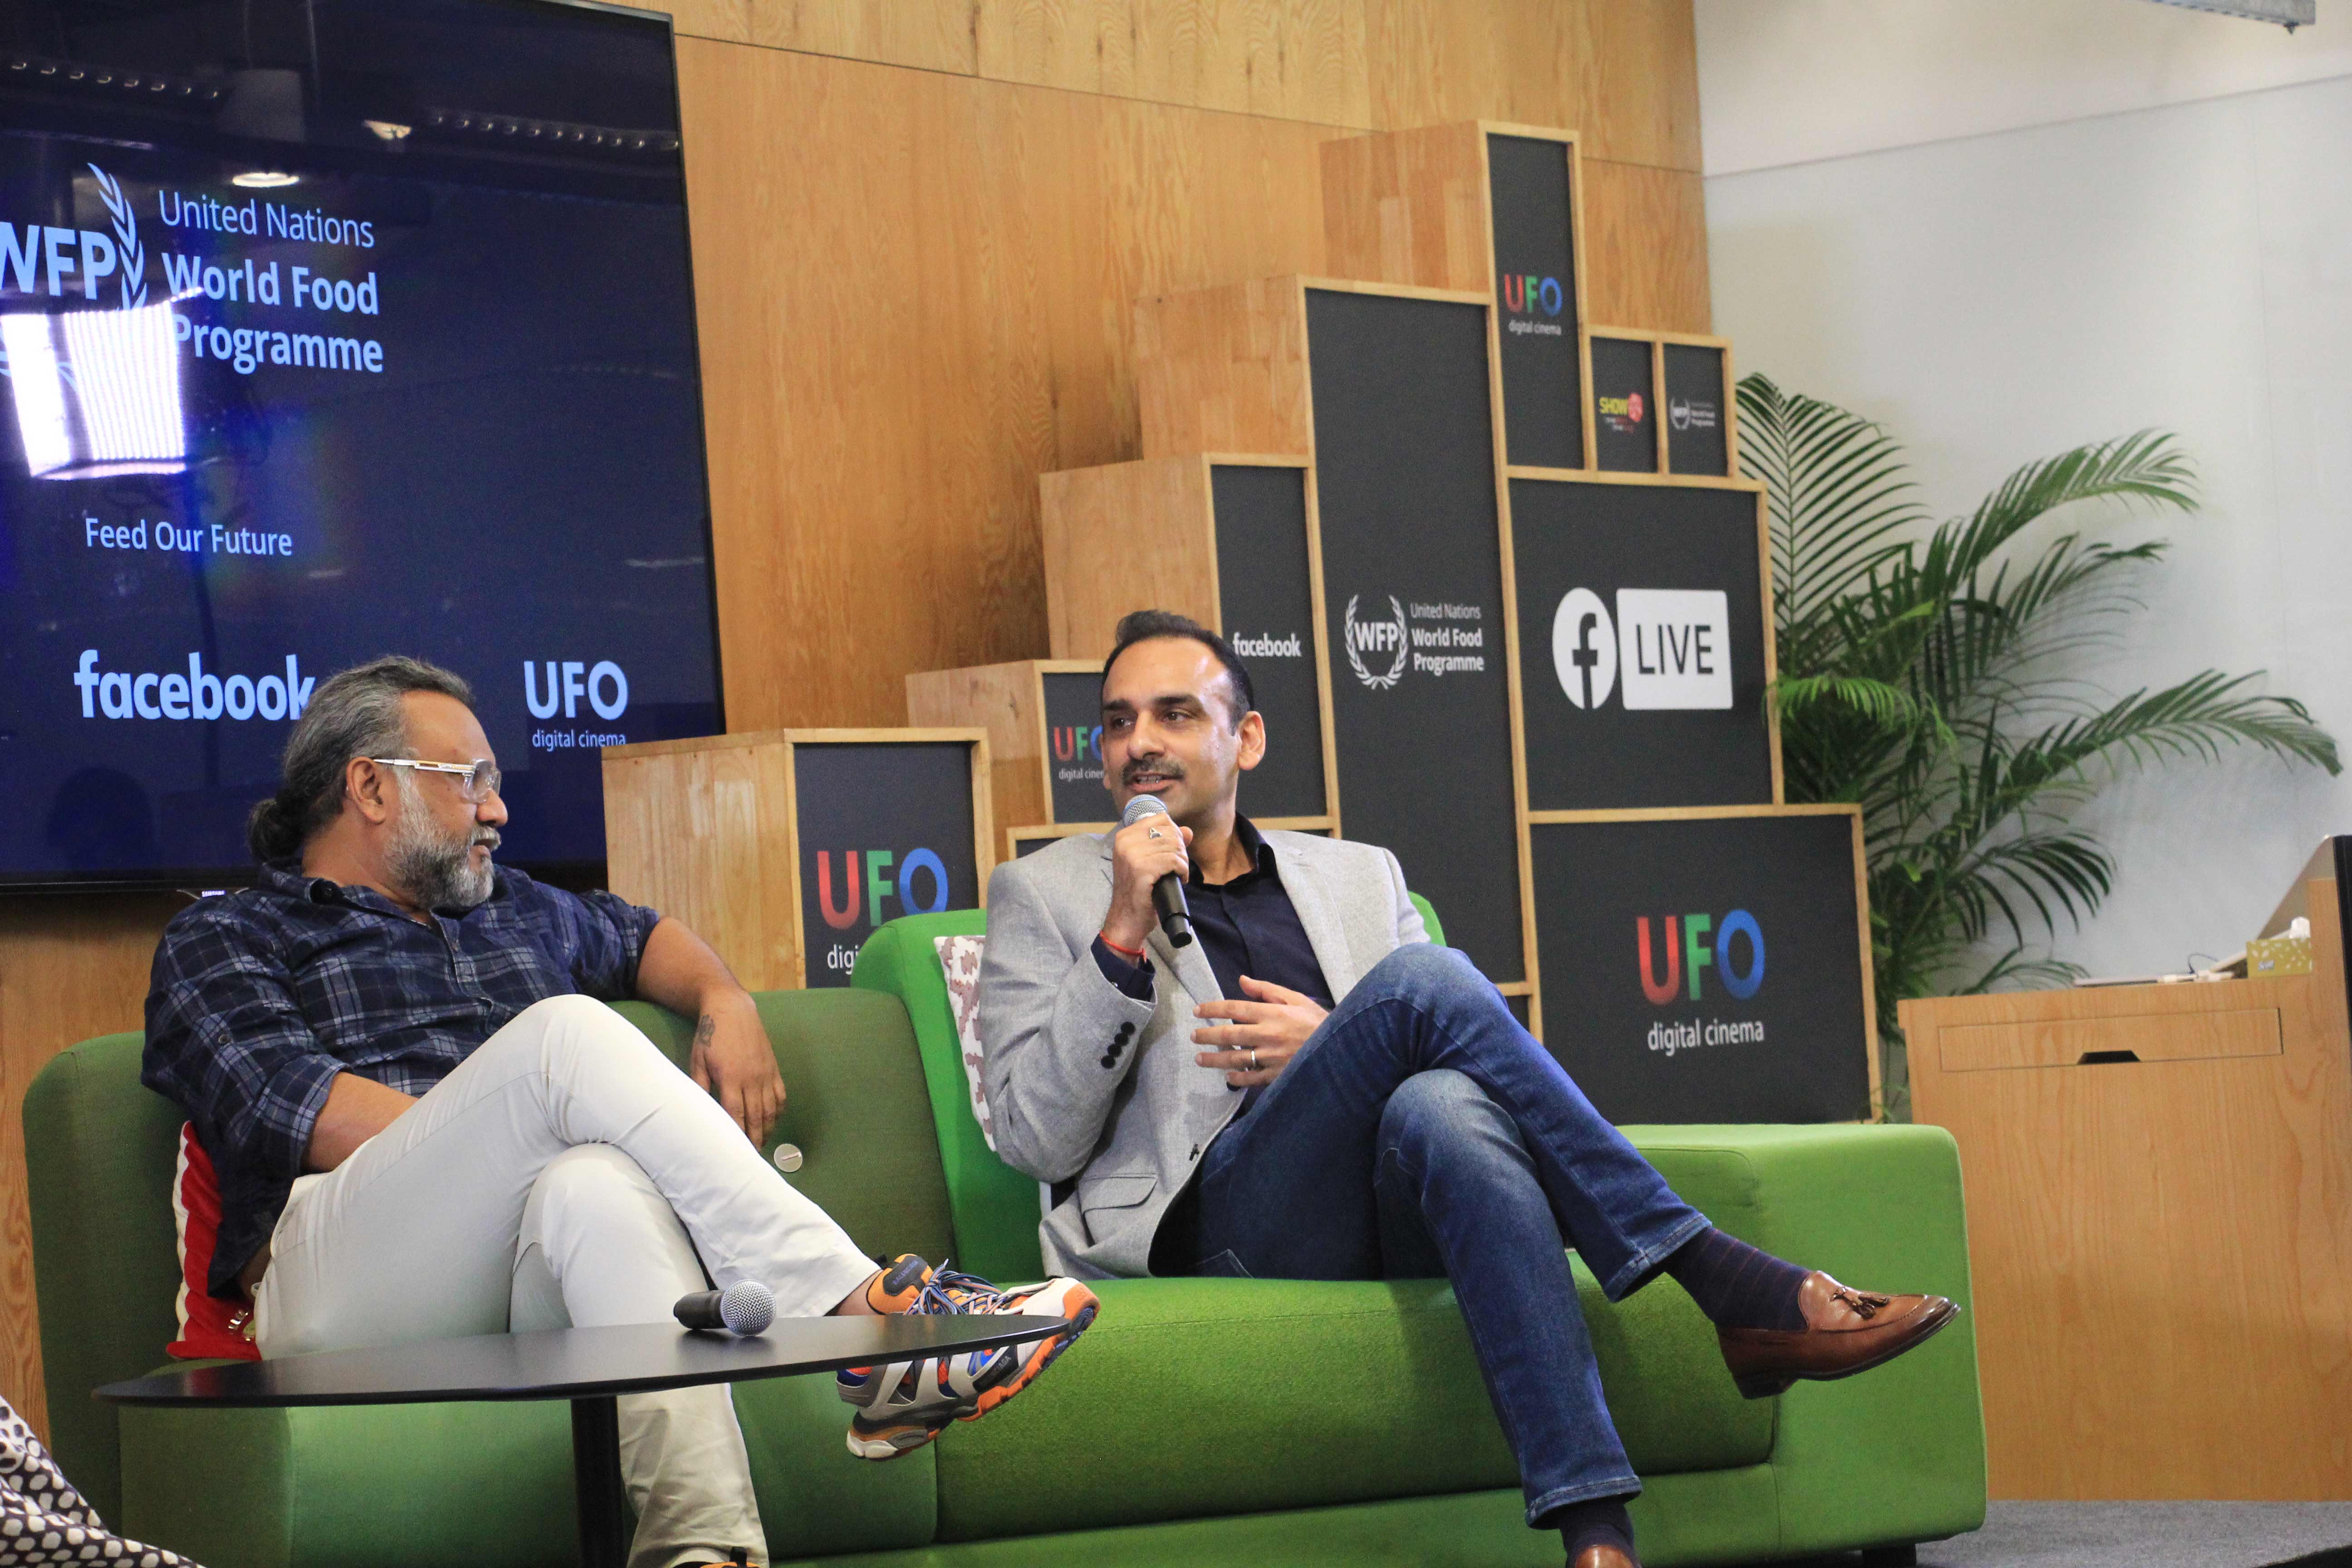 Article 15 director Anubhav Sinha and Mr Siddharth Bharadwaj, CMO, UFO Moviez in a discussion on cinema as a medium for bringing a behaviour change -Photo By GPN